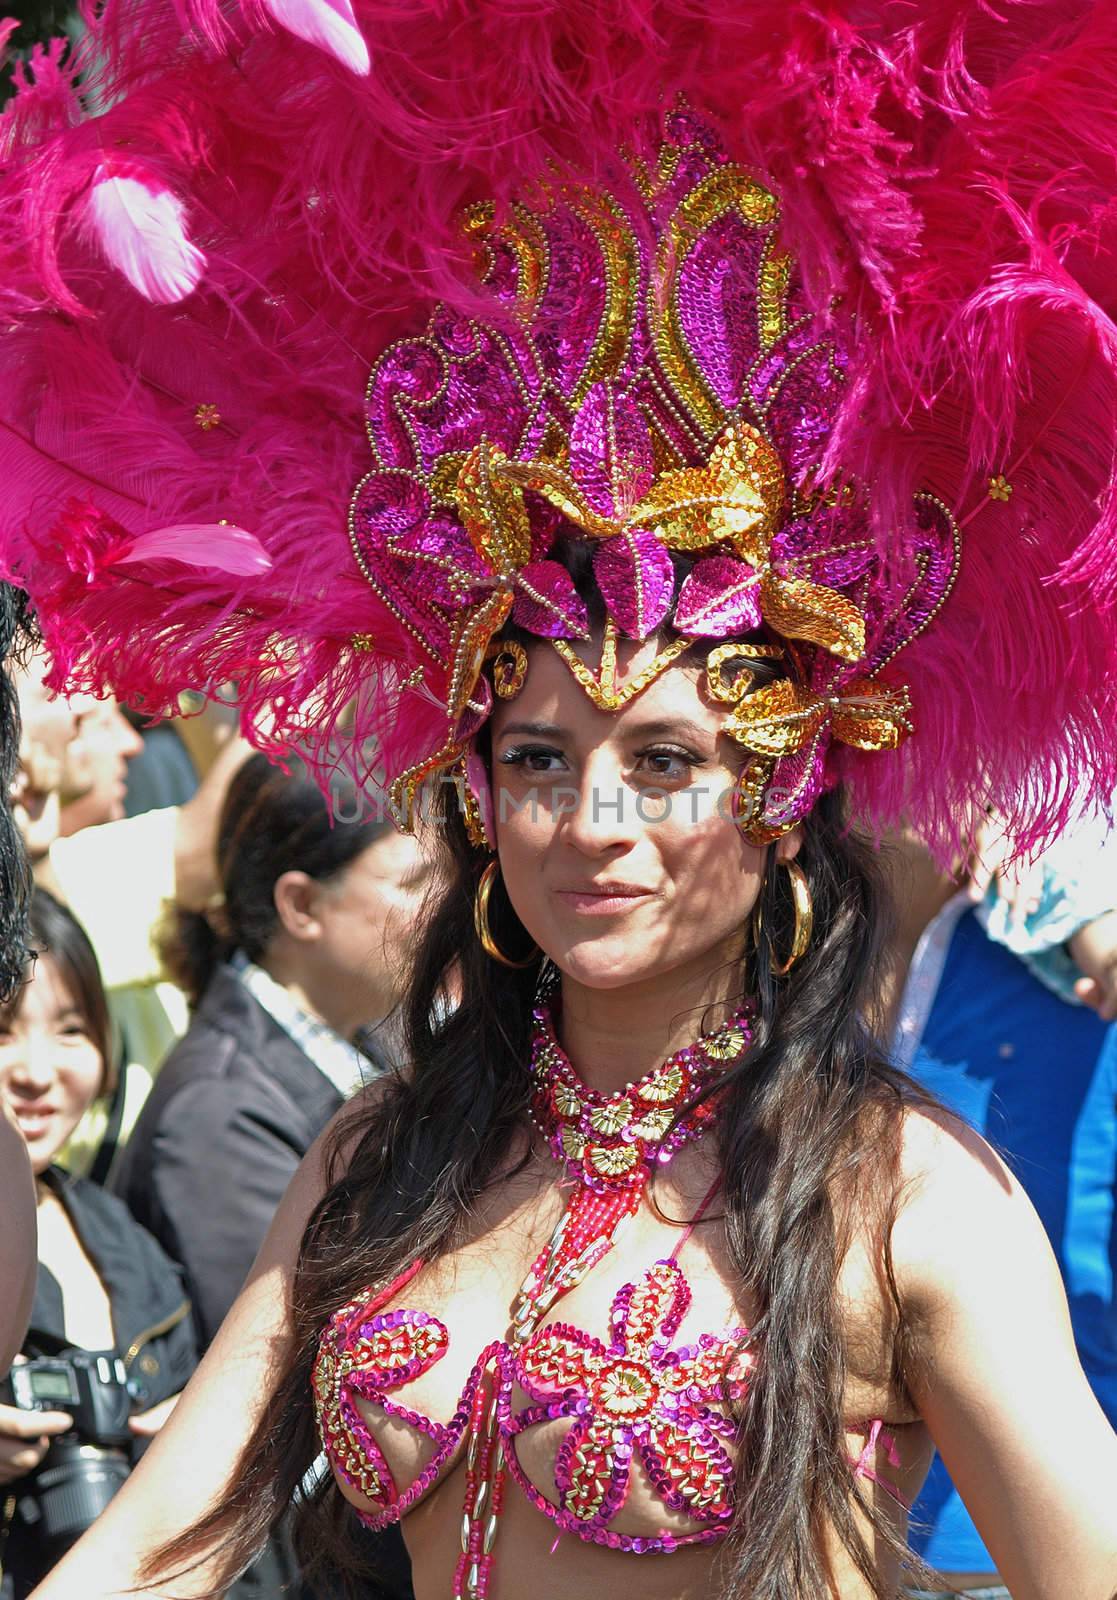 COPENHAGEN - MAY 22: 28th annual Copenhagen Carnival parade of fantastic costumes, samba dancing and Latin styles starts on May 21 - 23. The festivities on this colourful tradition is admission free.